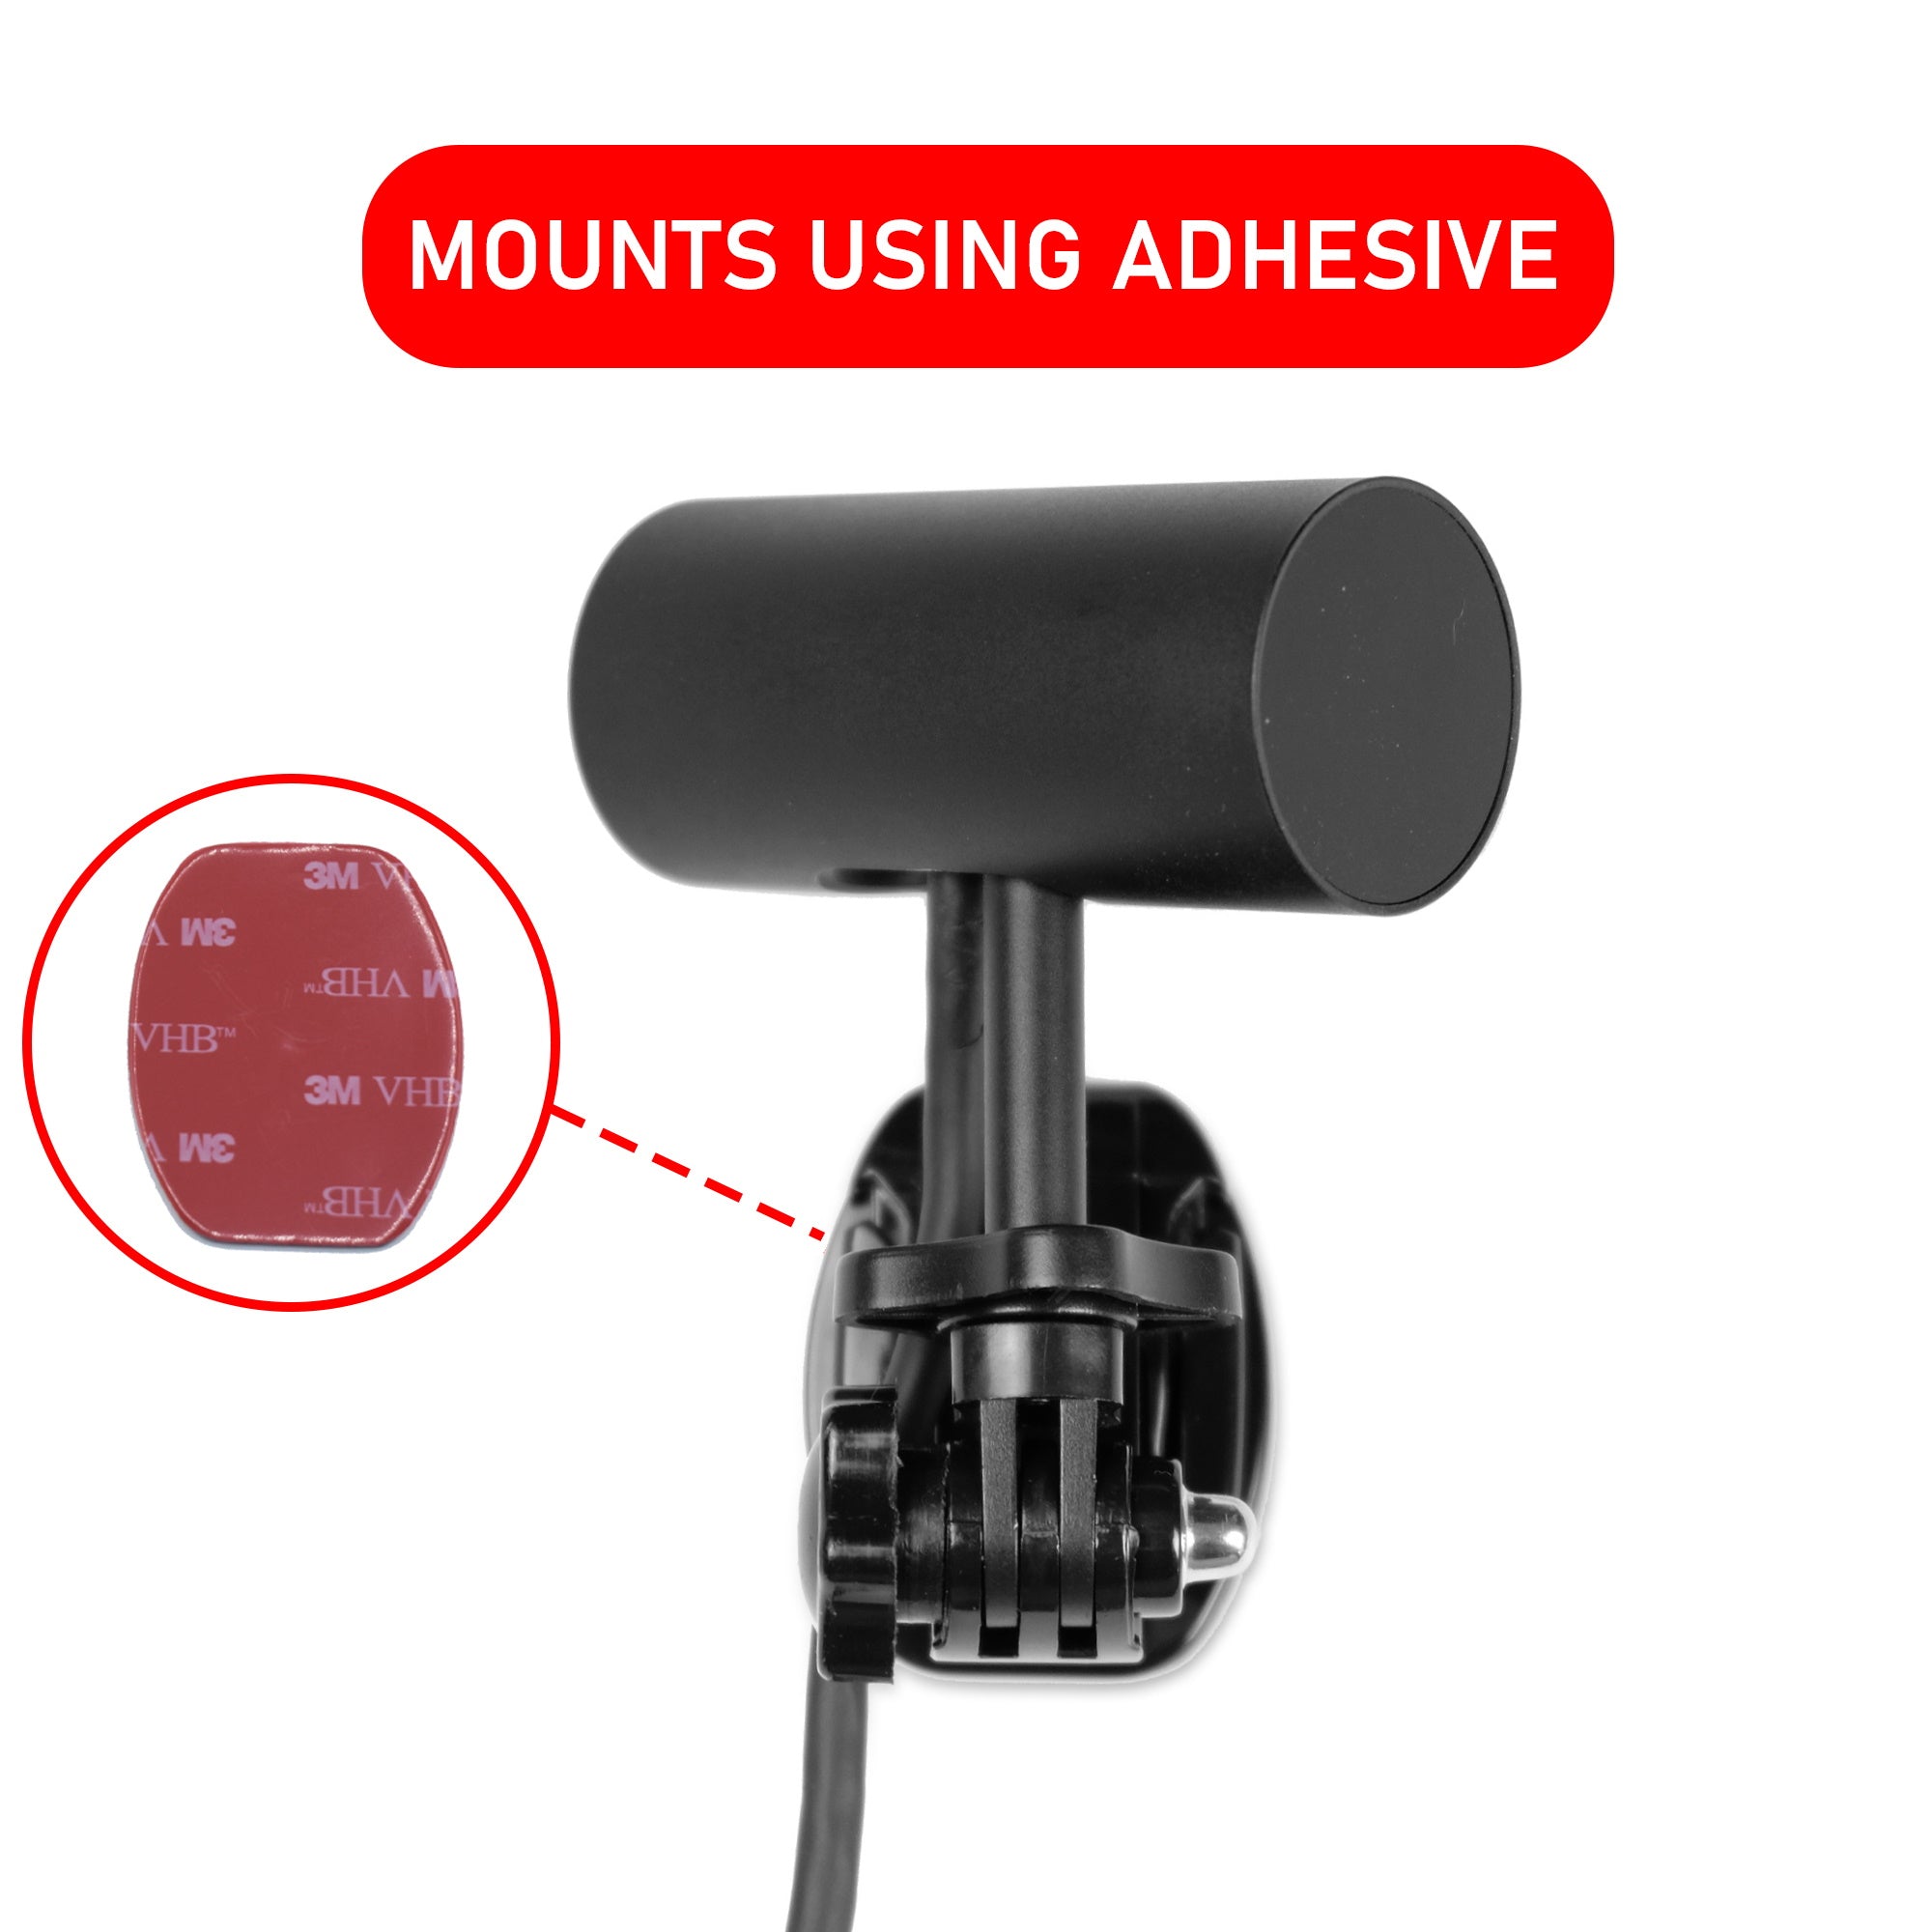 Mounts using Adhesive. Shows a sensor mount and how it mounts to a wall with adhesive 